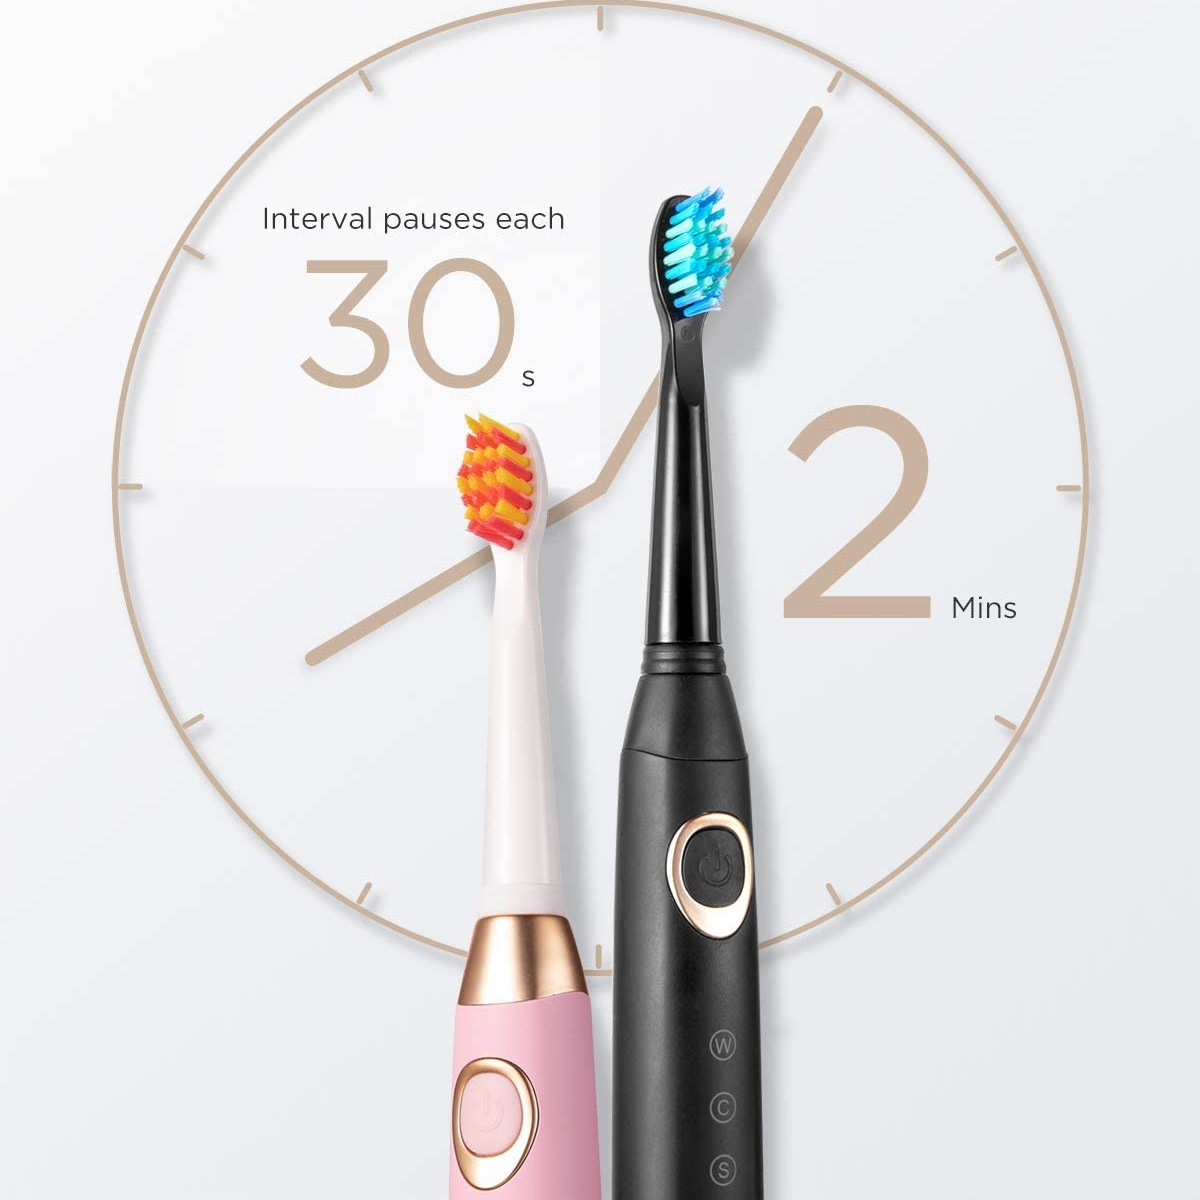 Fairywill D8 Sonic Electric Toothbrush Adult Rechargeable Couple's Automatic White Toothbrush Fw508